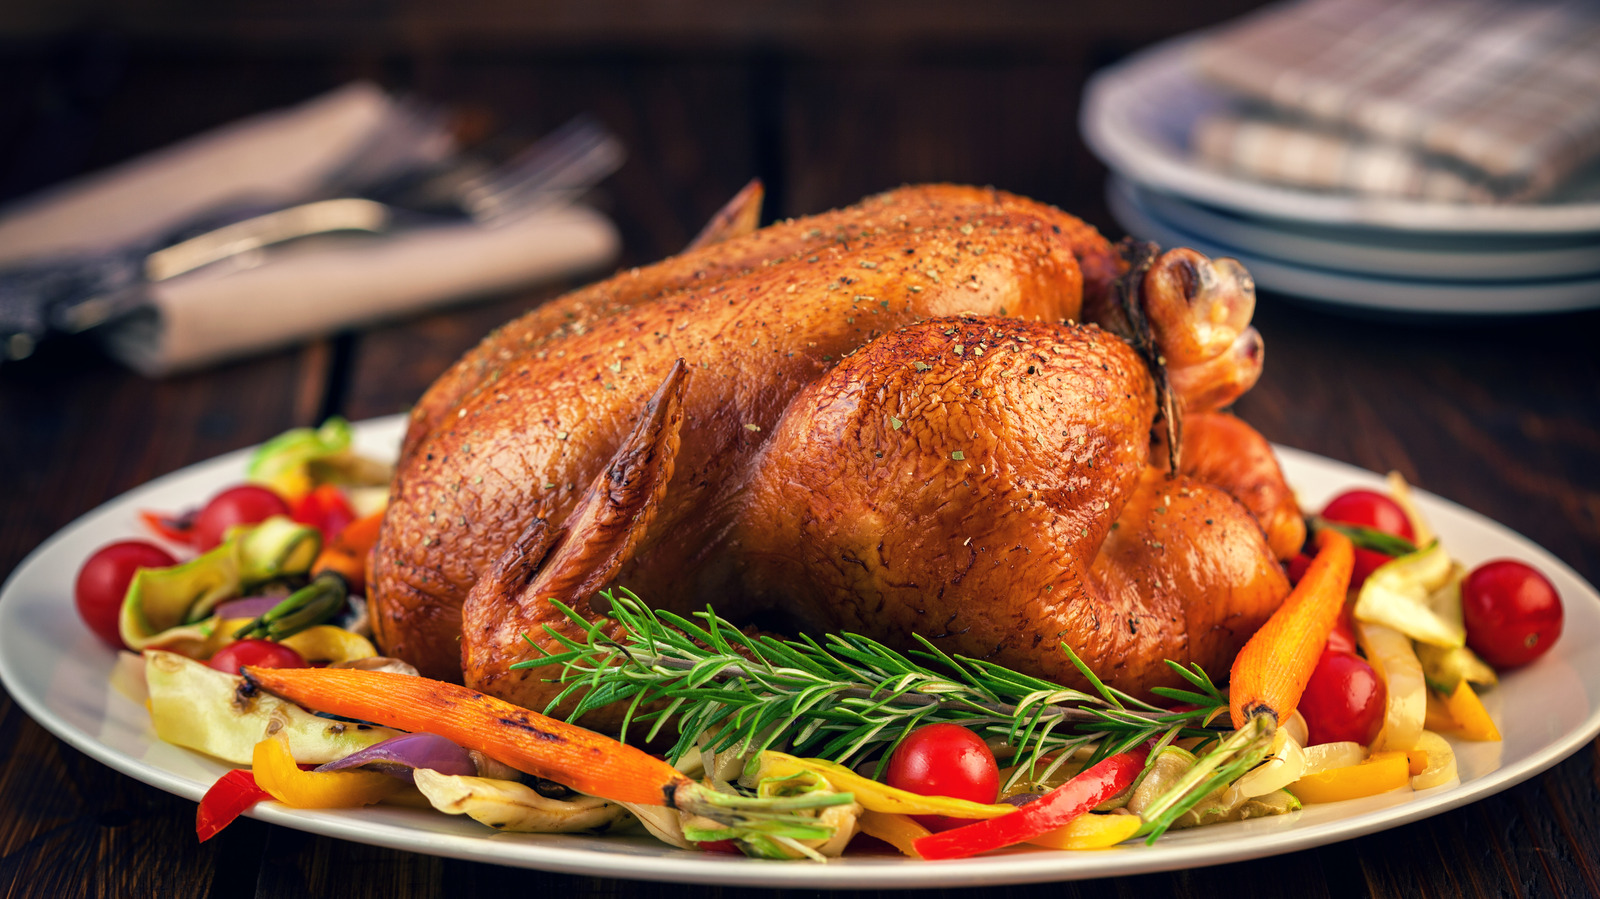 https://www.thedailymeal.com/img/gallery/28-insider-tips-for-picking-the-perfect-thanksgiving-turkey/l-intro-1700009583.jpg